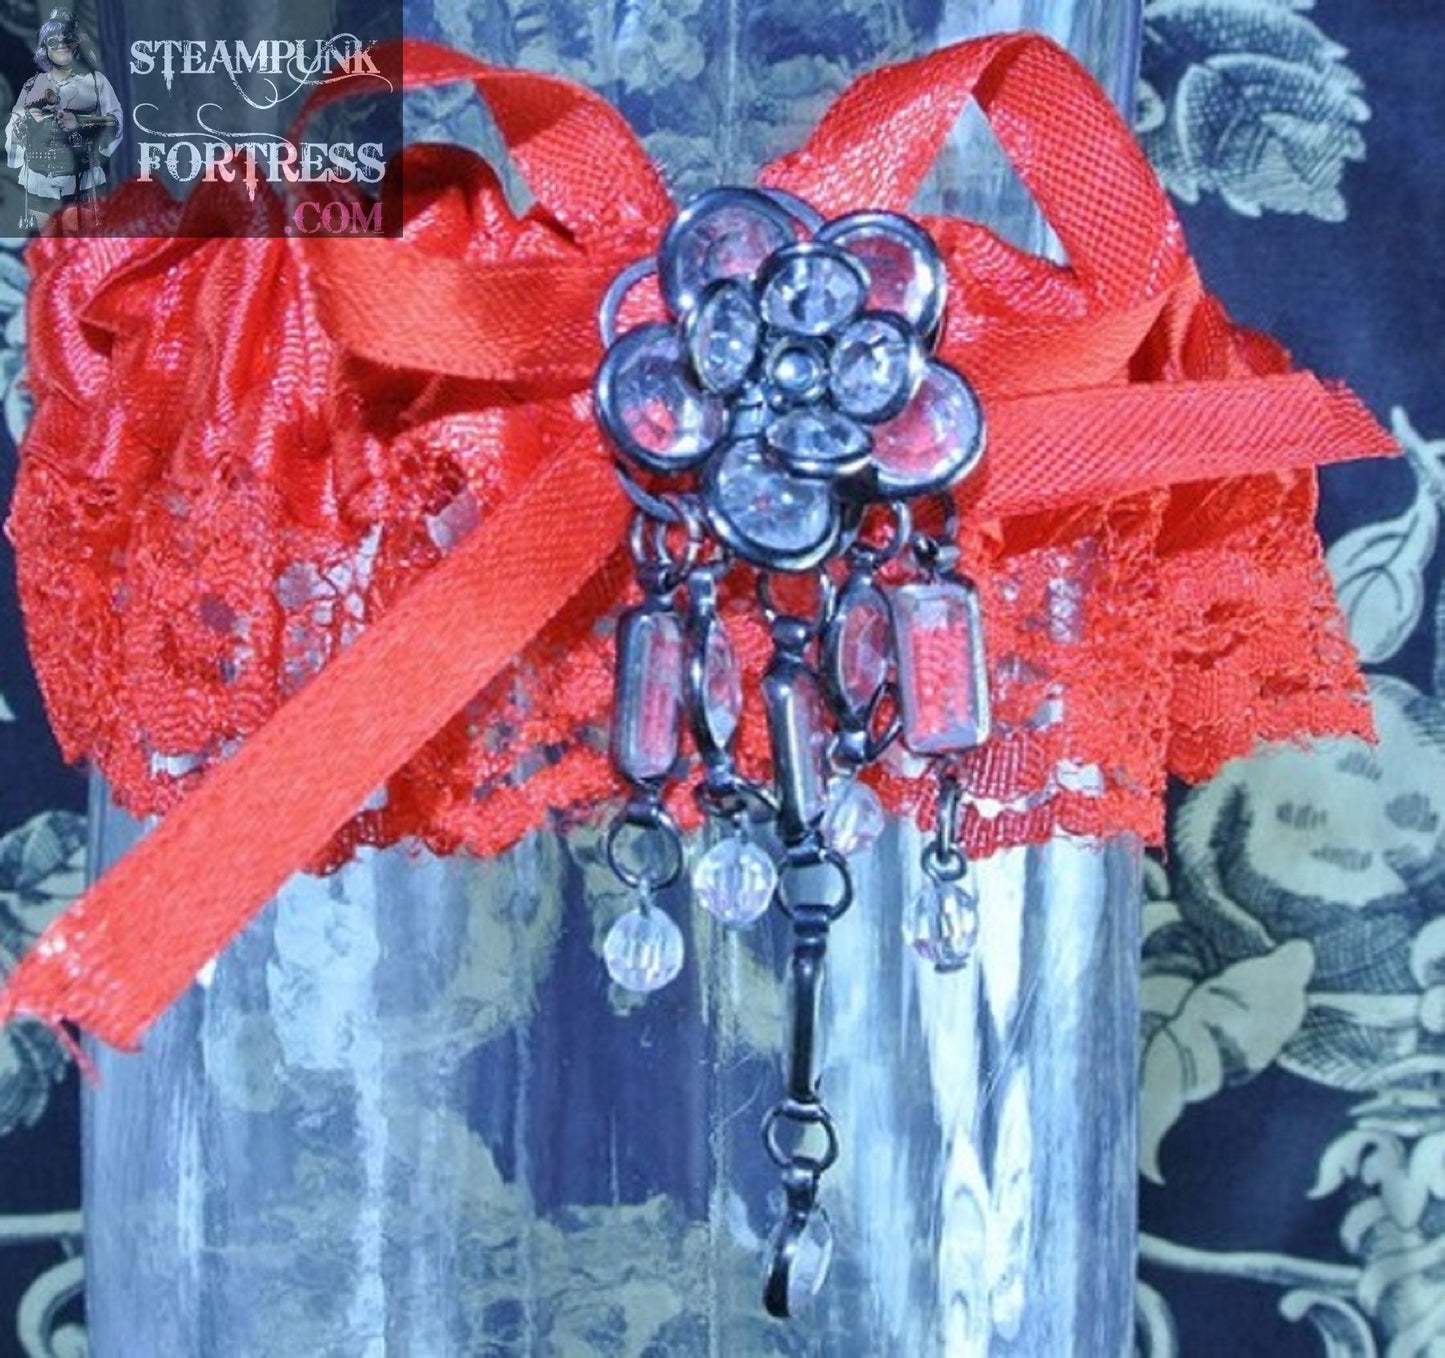 RED GUNMETAL CLEAR CRYSTAL CLUSTER DROP RED LACE GARTER WEDDING STARR WILDE STEAMPUNK FORTRESS